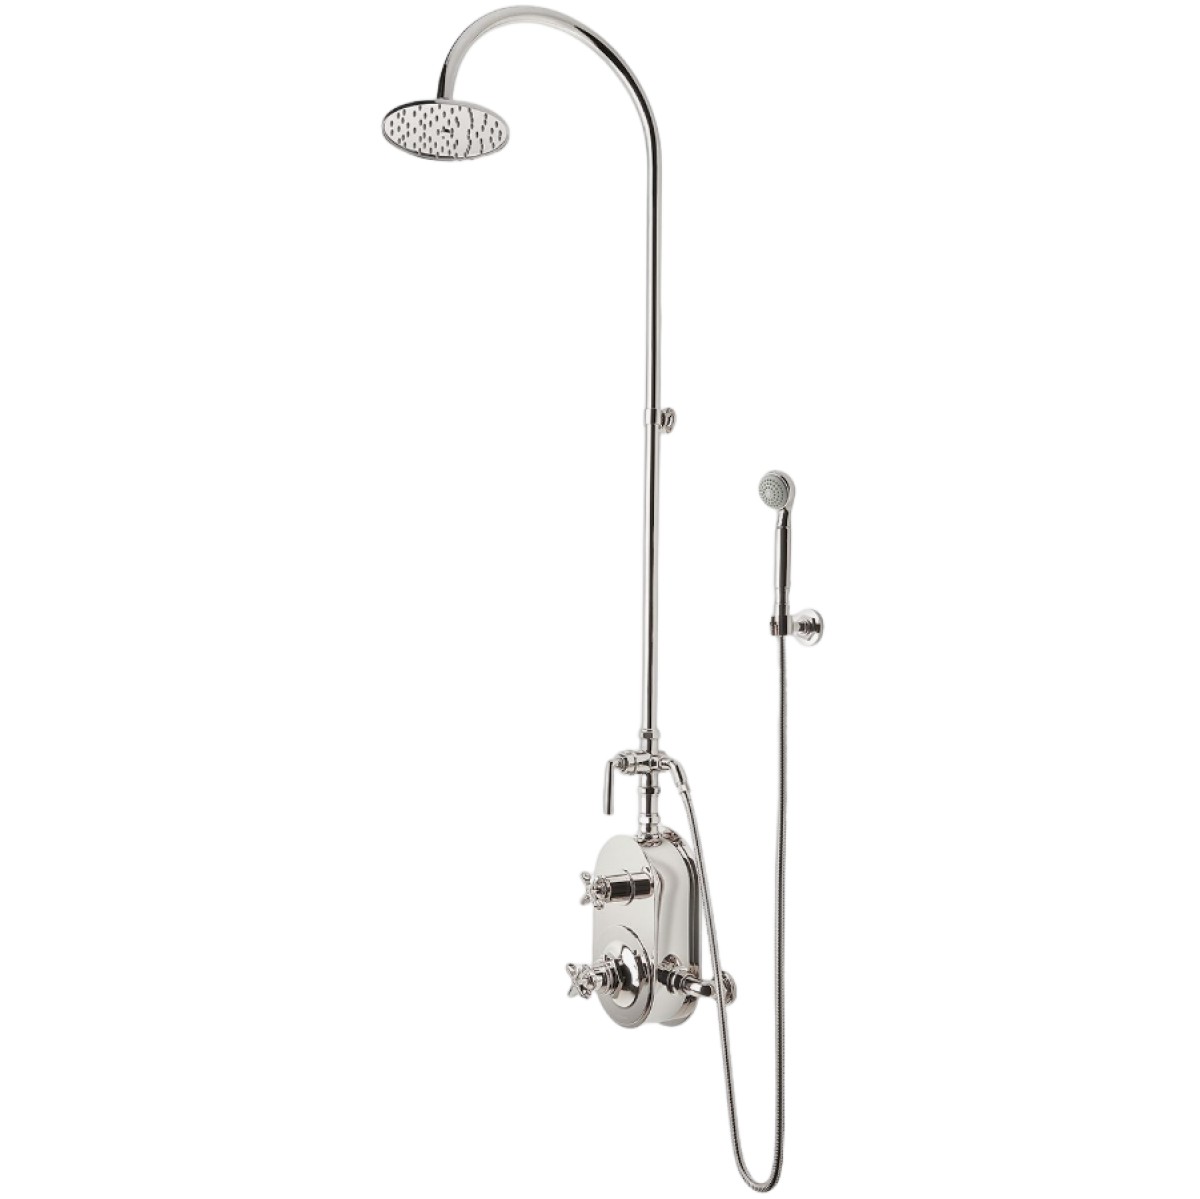 Henry Exposed Thermostatic Shower System with 8" Shower Head, Handshower, Metal Lever Diverter Handle and Metal Cross Handles